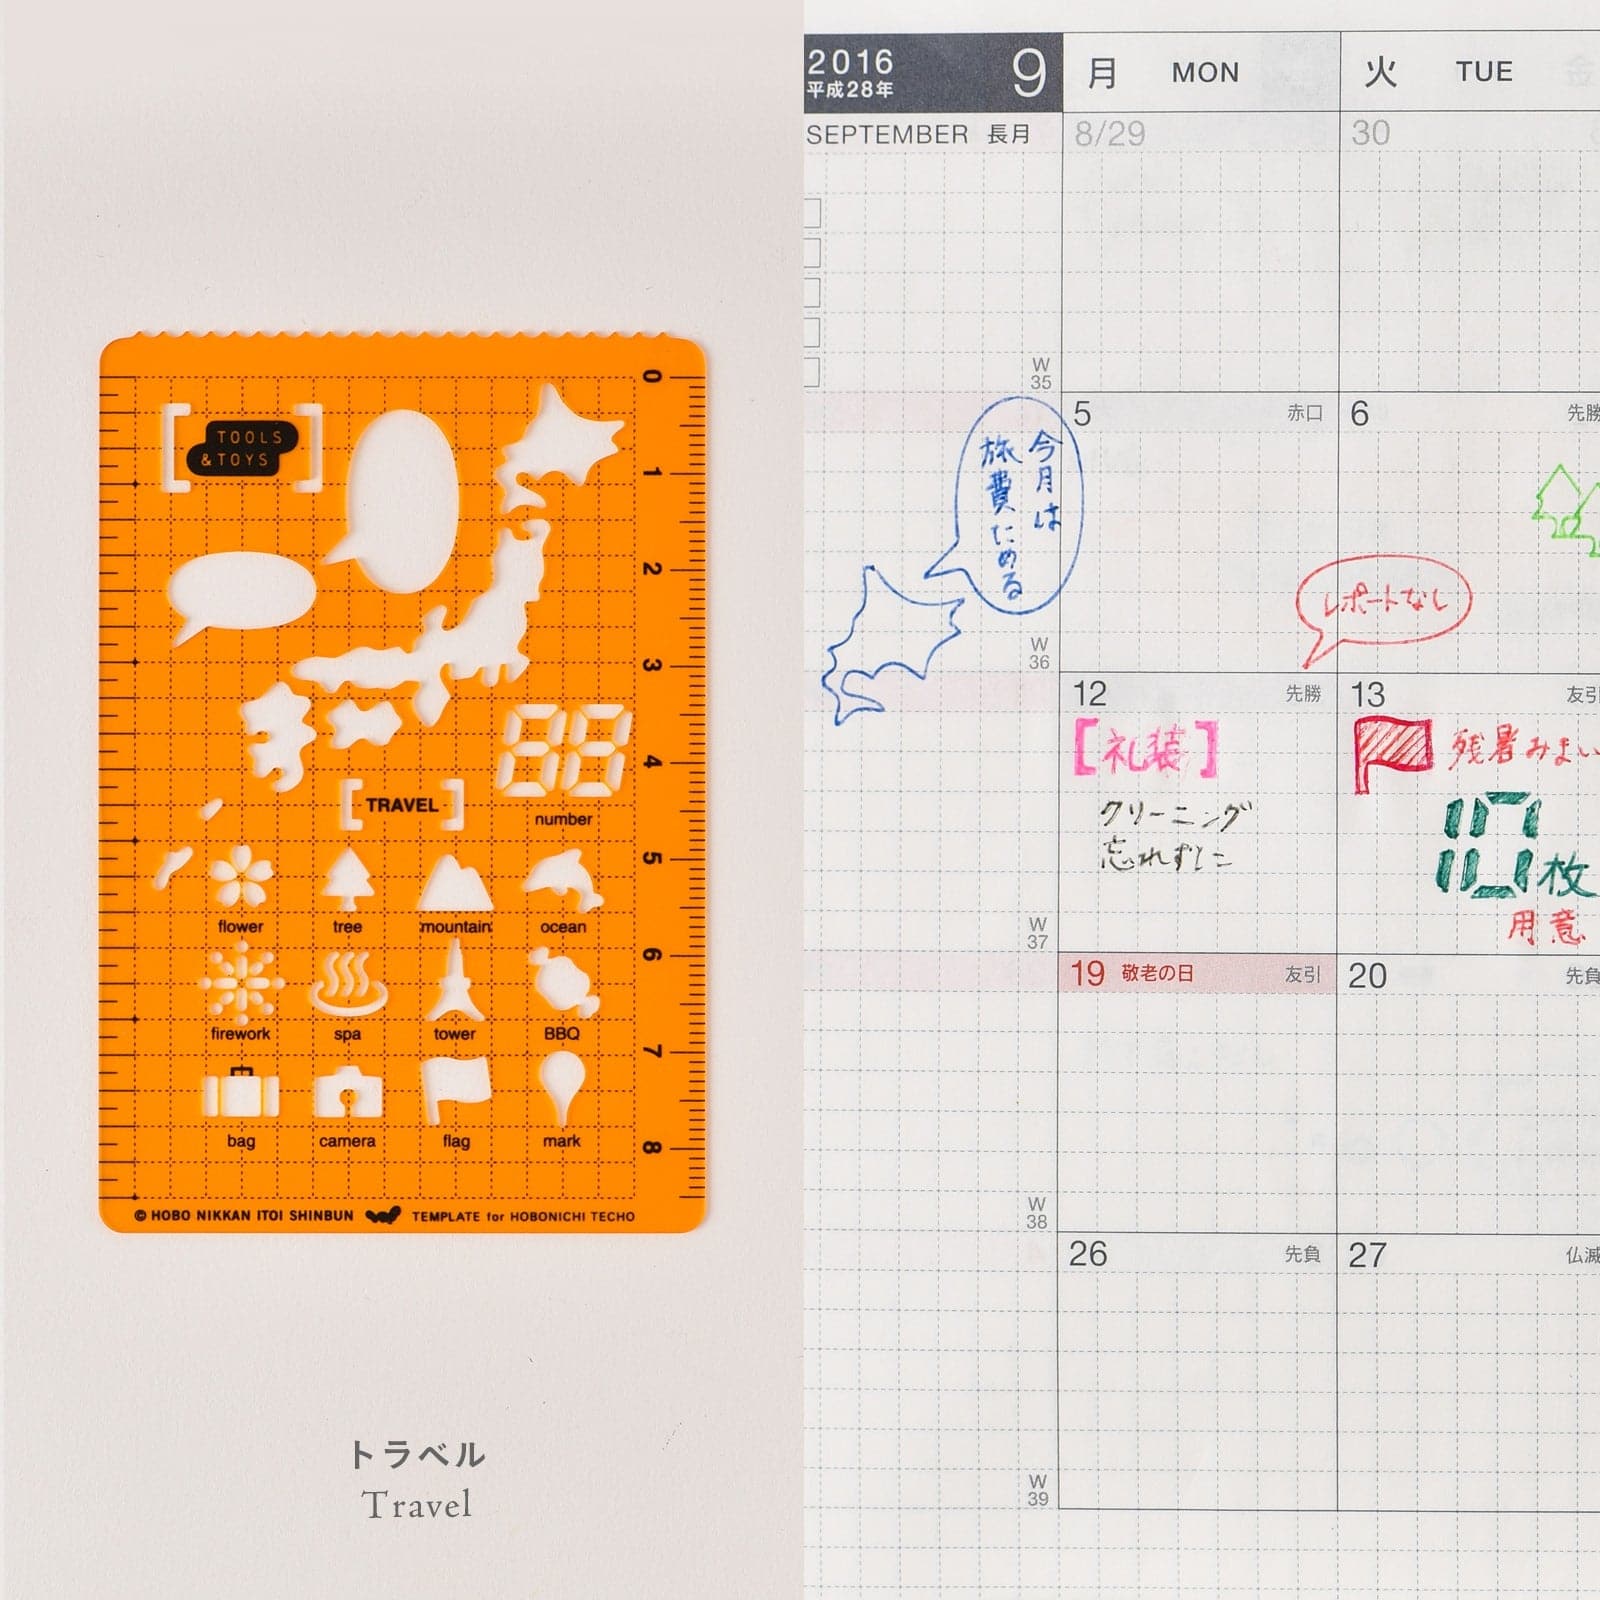 Hobonichi Frame Stickers for Dates